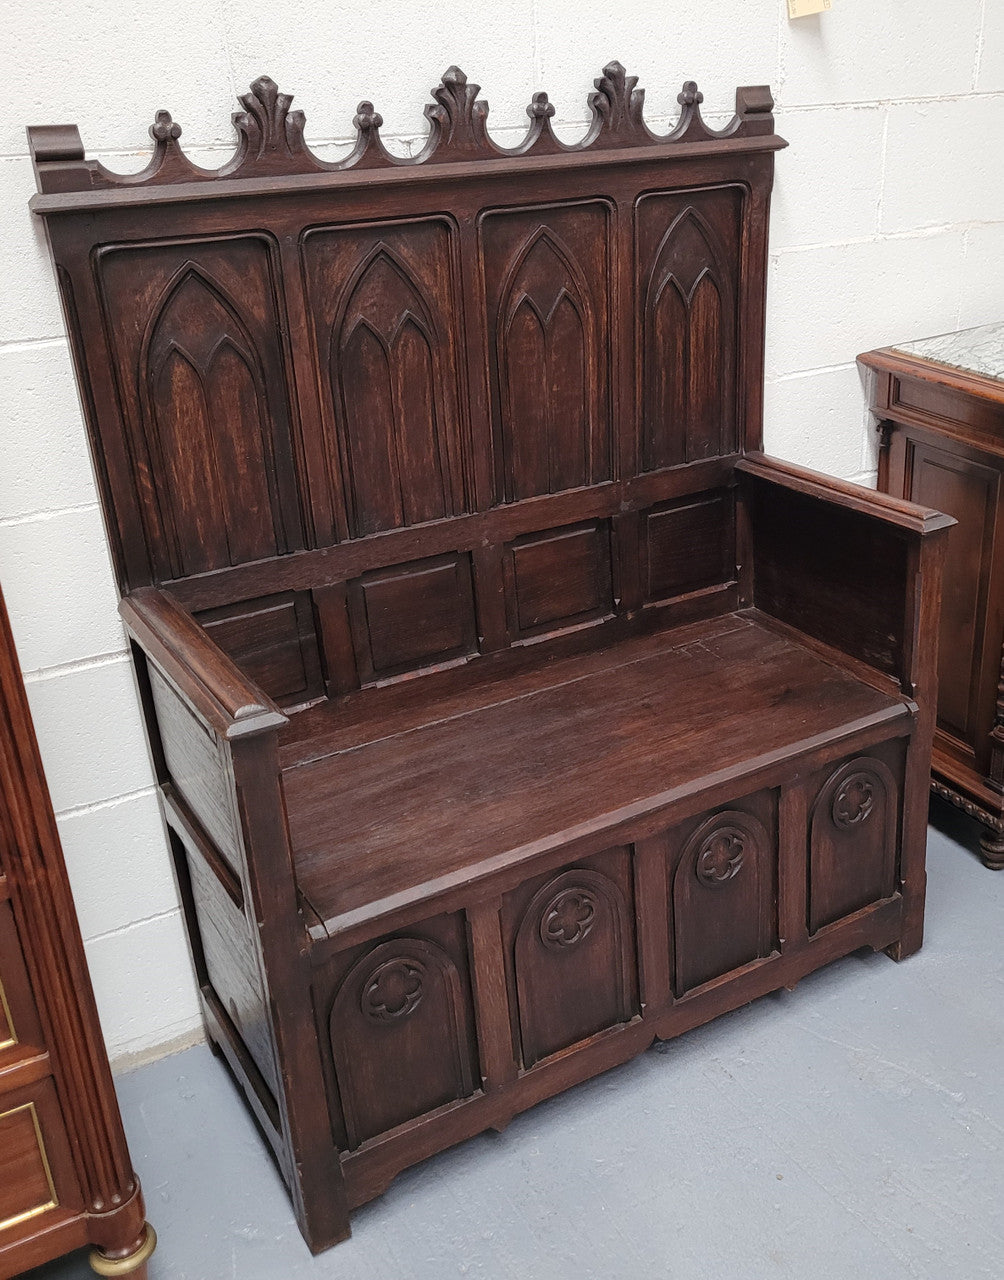 French Oak 19th Century gothic style high backed hall seat. Amazing detailed carving and is good detailed condition.